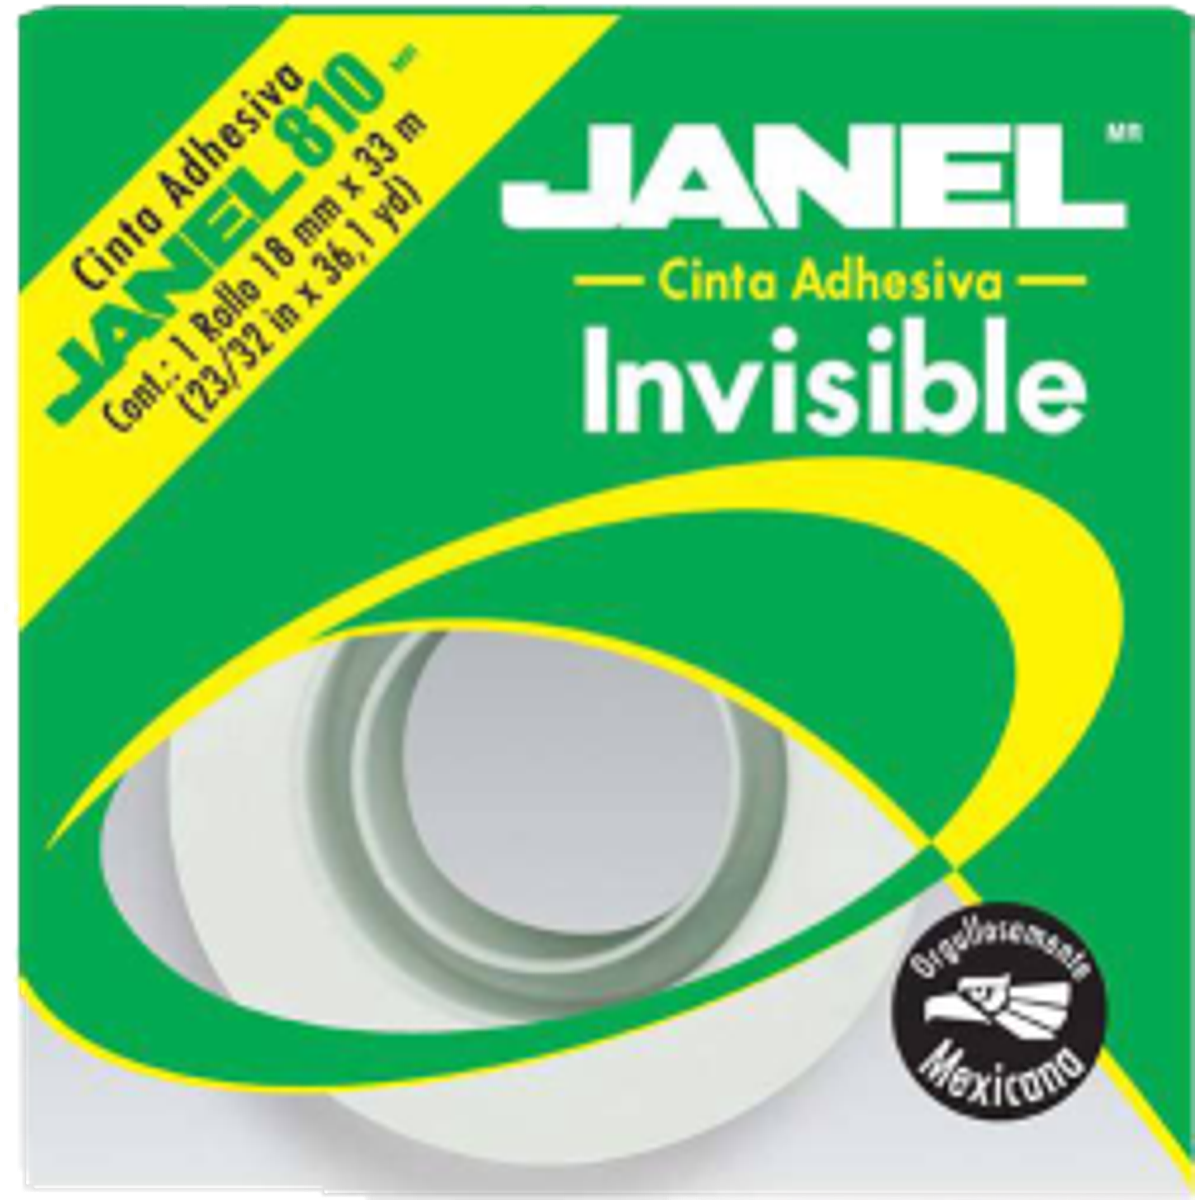 Cinta invisible 810 18 mm x 33m janel